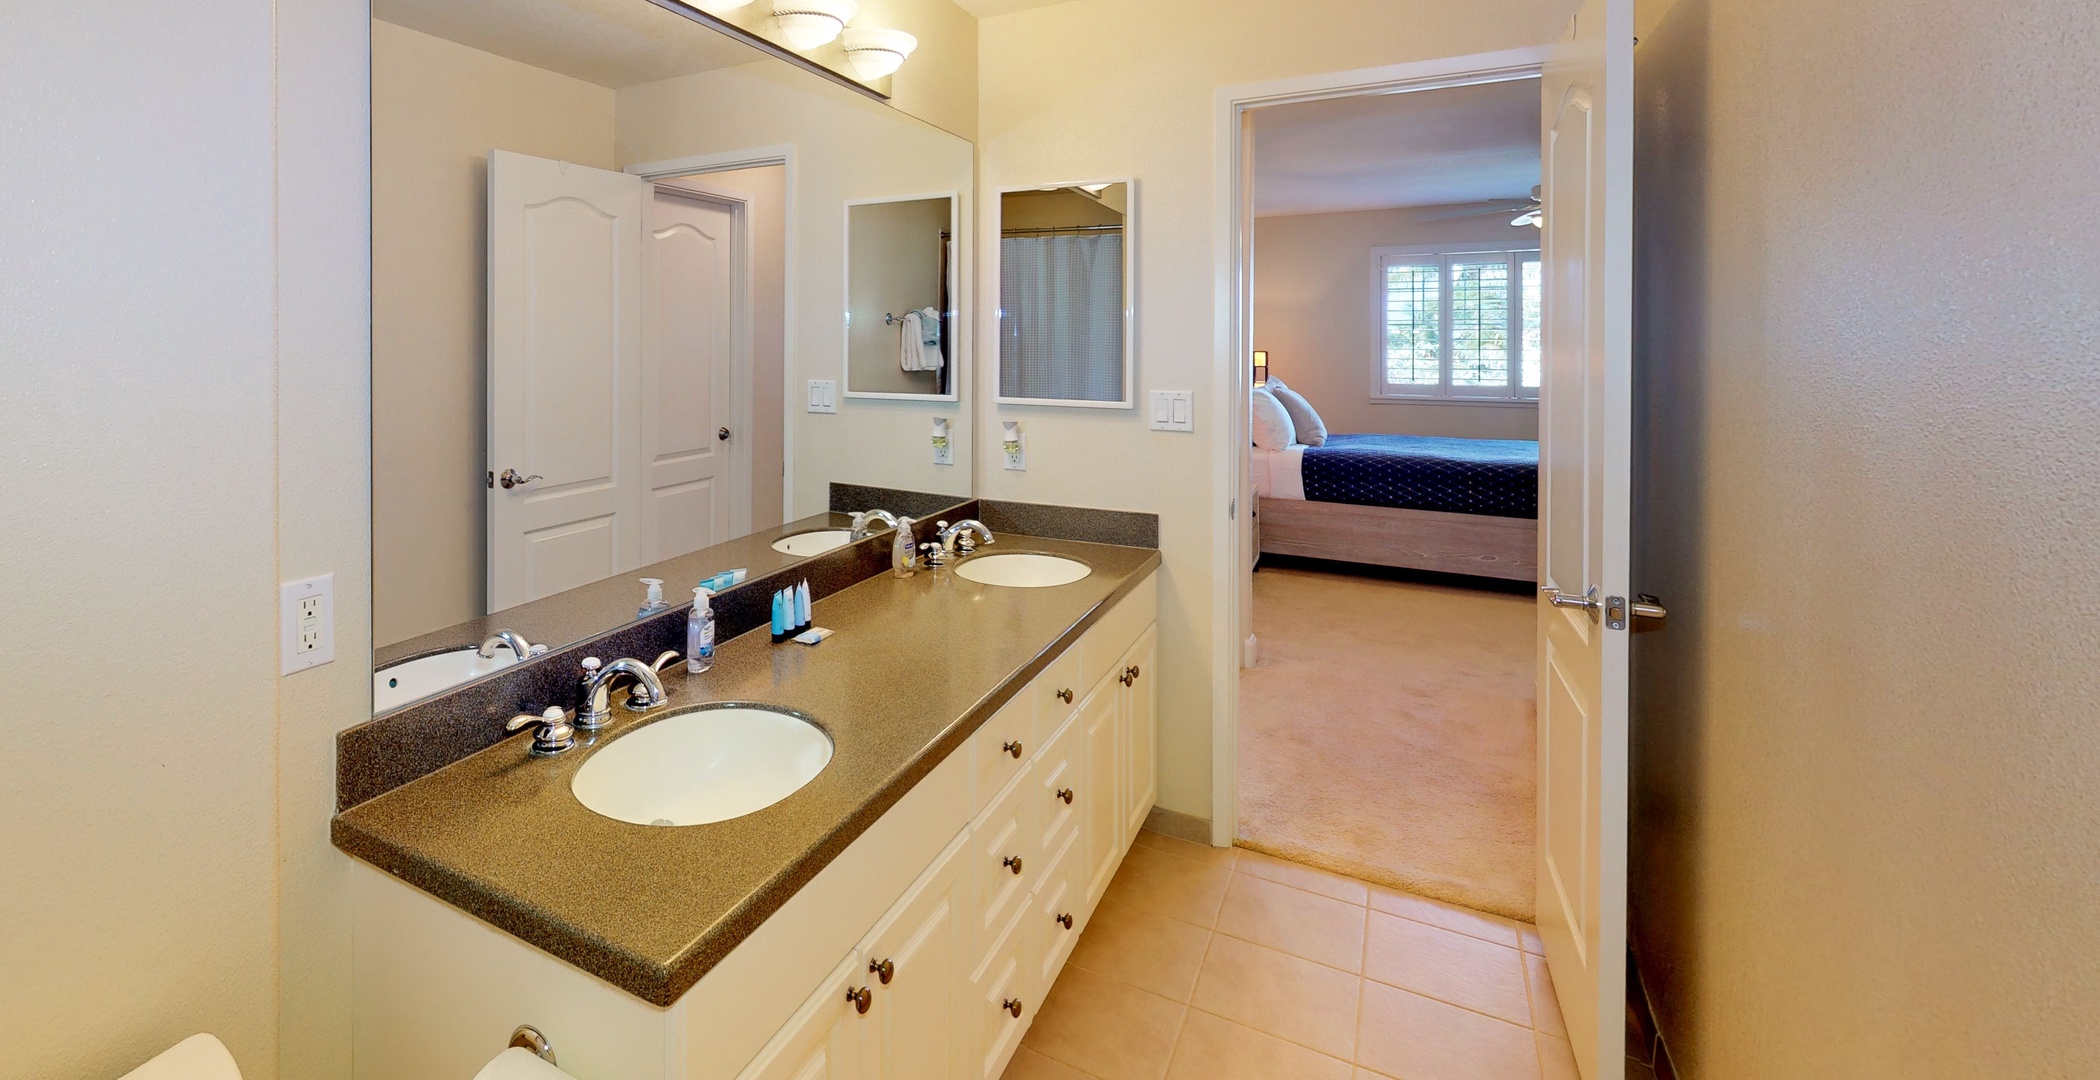 Kapolei Vacation Rentals, Ko Olina Kai 1065E - The primary guest bathroom with a double vanity.